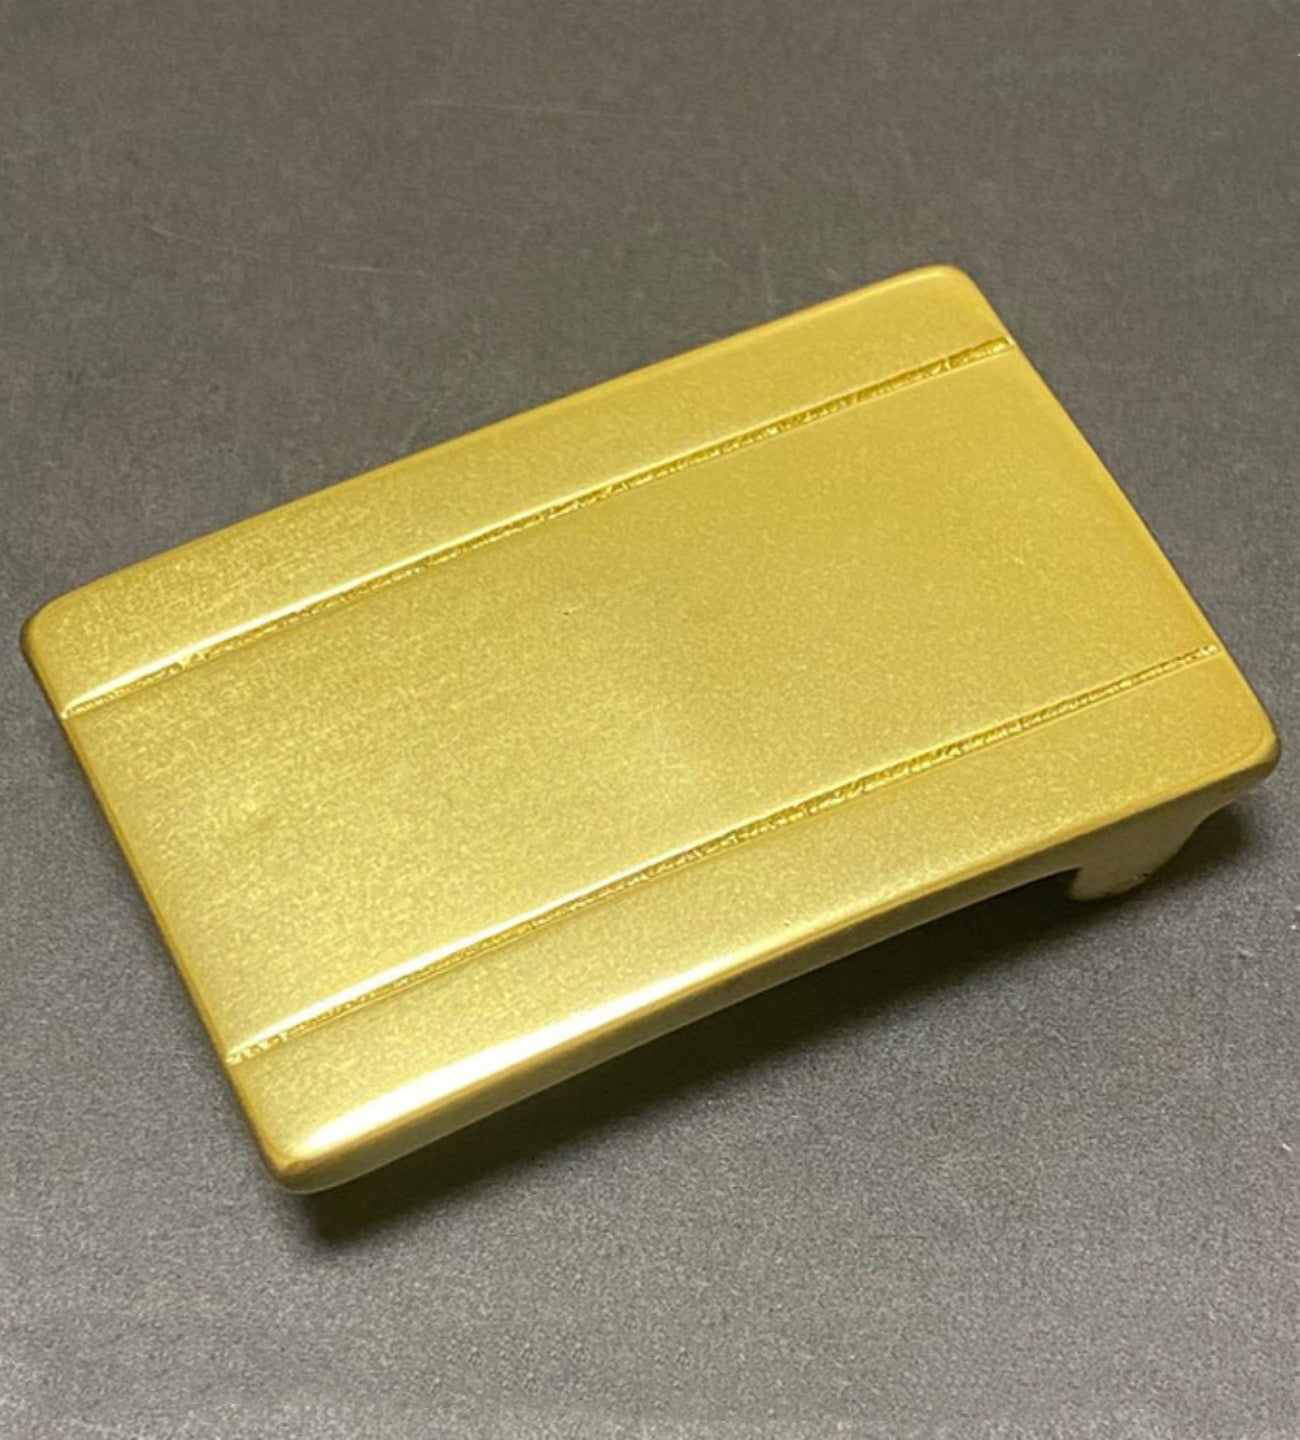 40MM New Best Collar Buckle Solid Brass Available At Wholesale Price Single Bar Buckle with Thick Pin a Roller available in all size